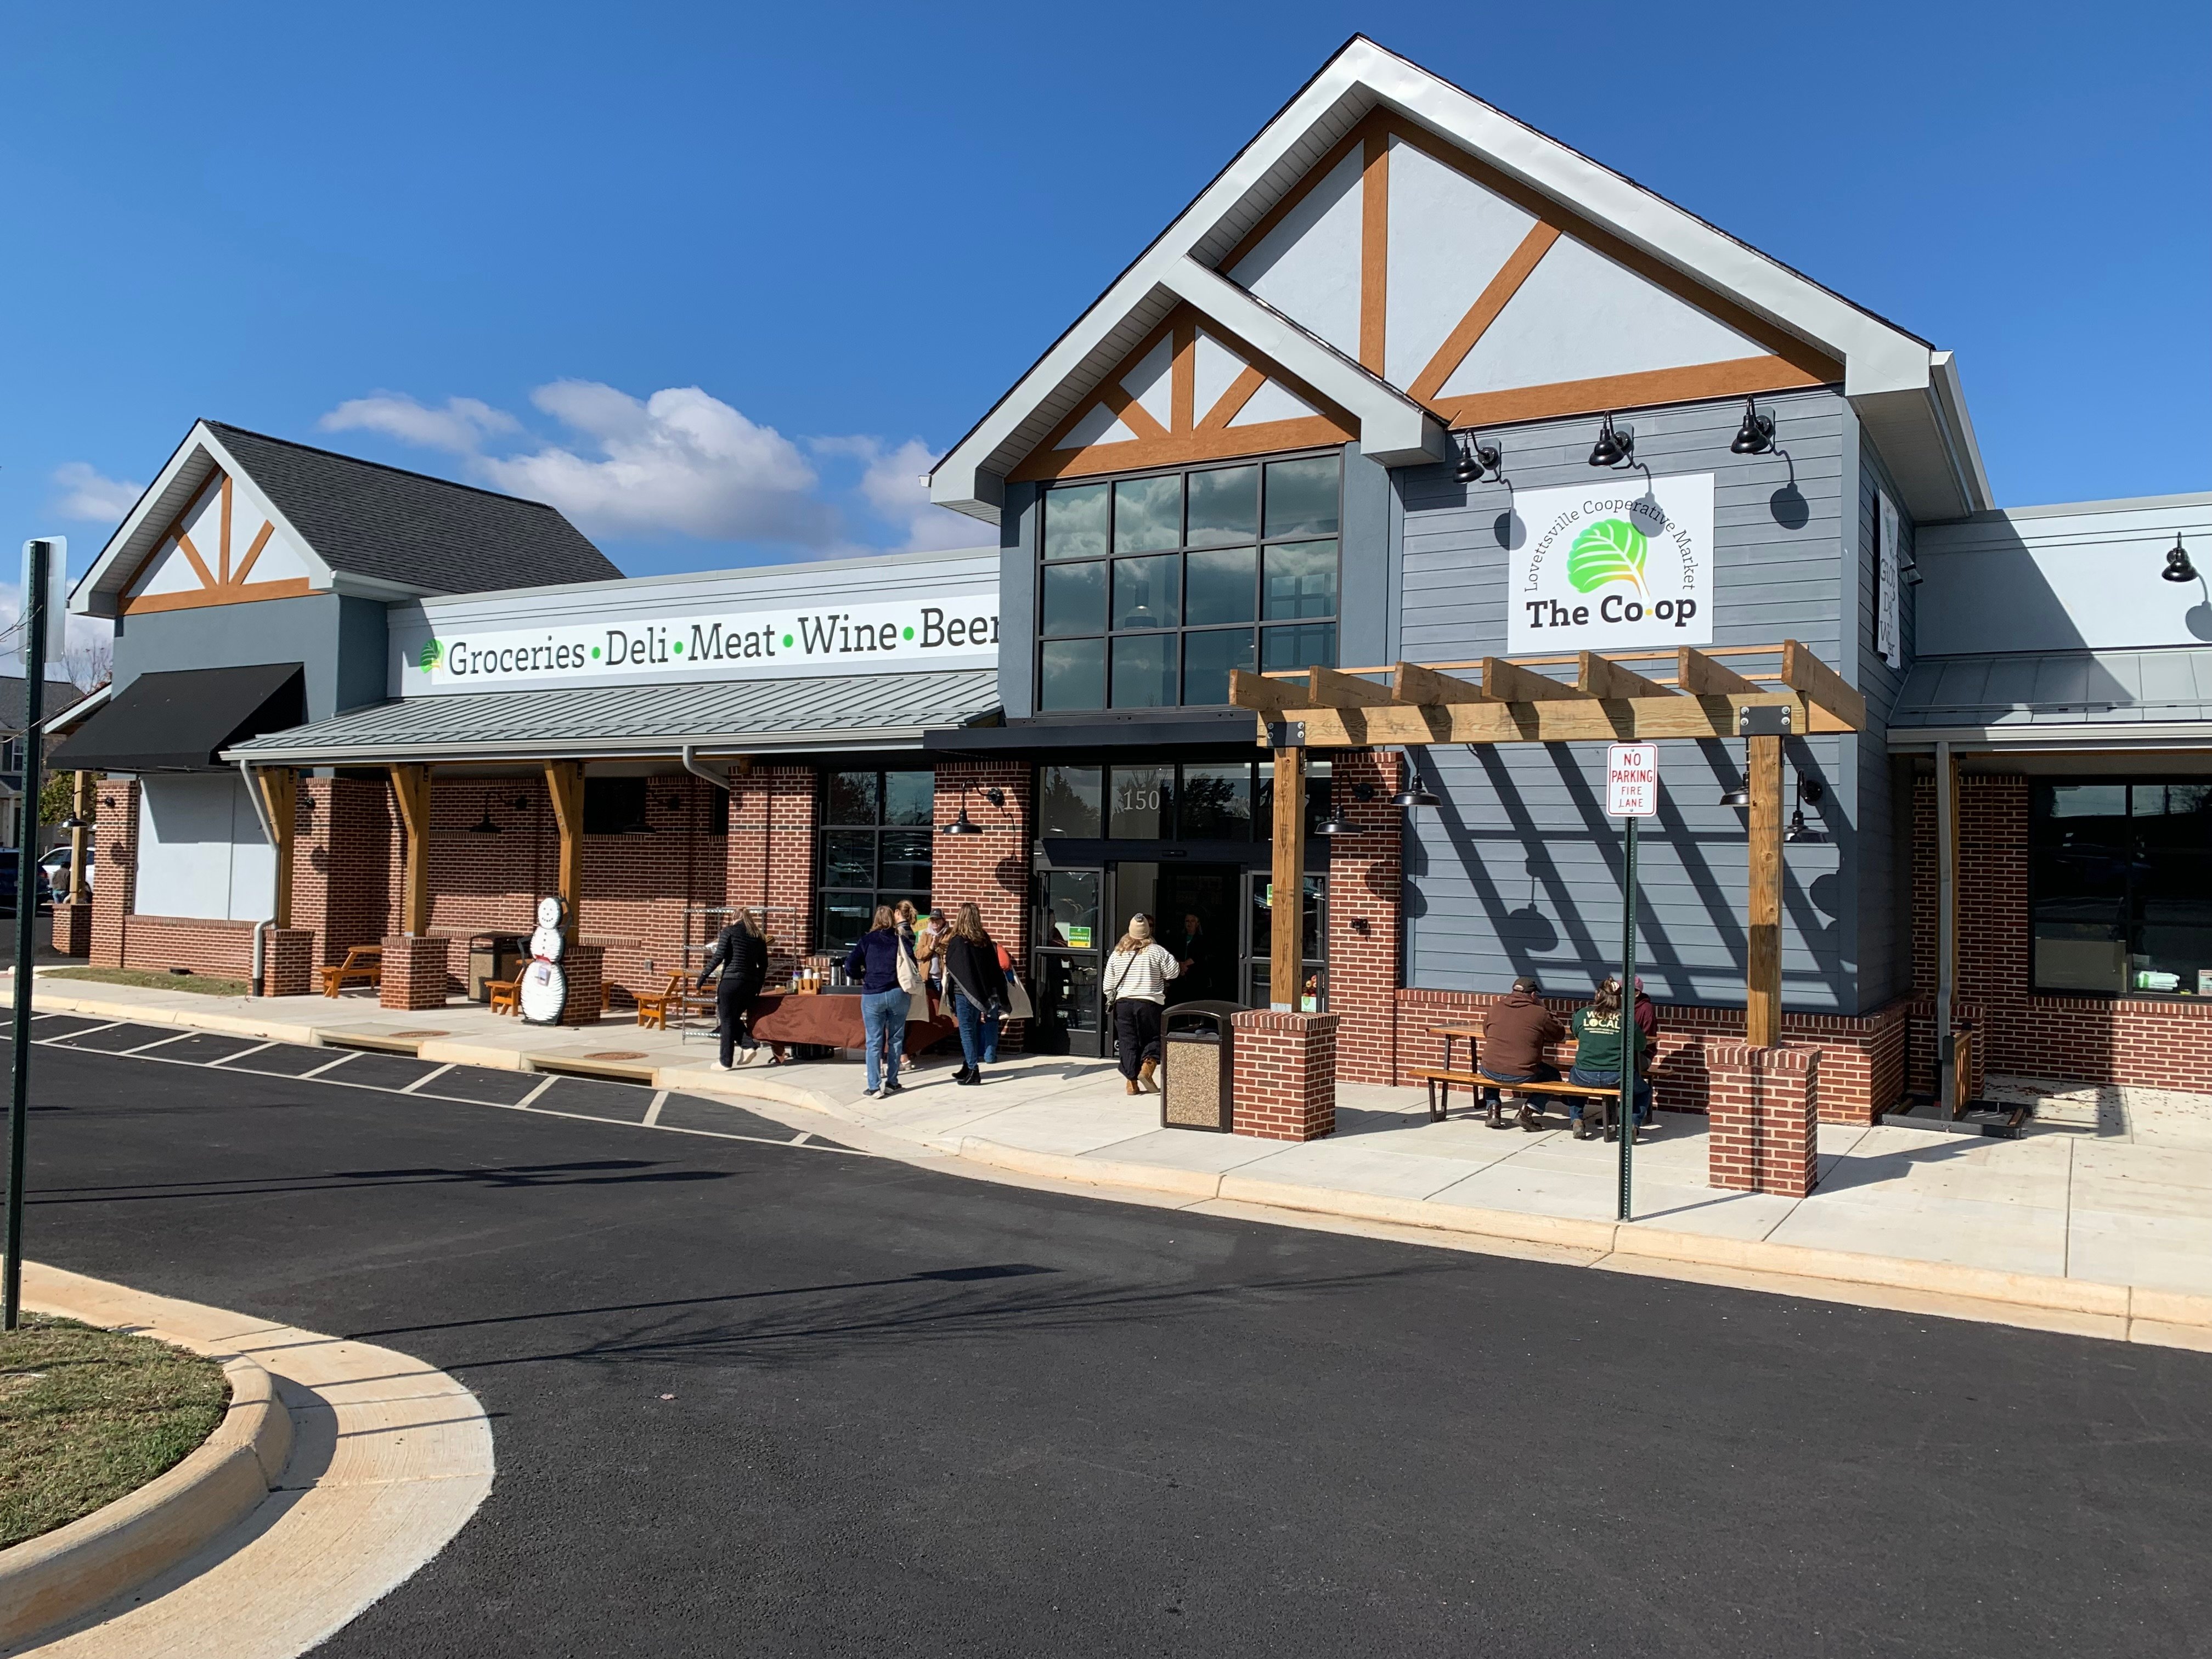 National Cooperative Bank Provides $950,000 to Open a New Cooperative Grocery Store in Lovettsville, VA